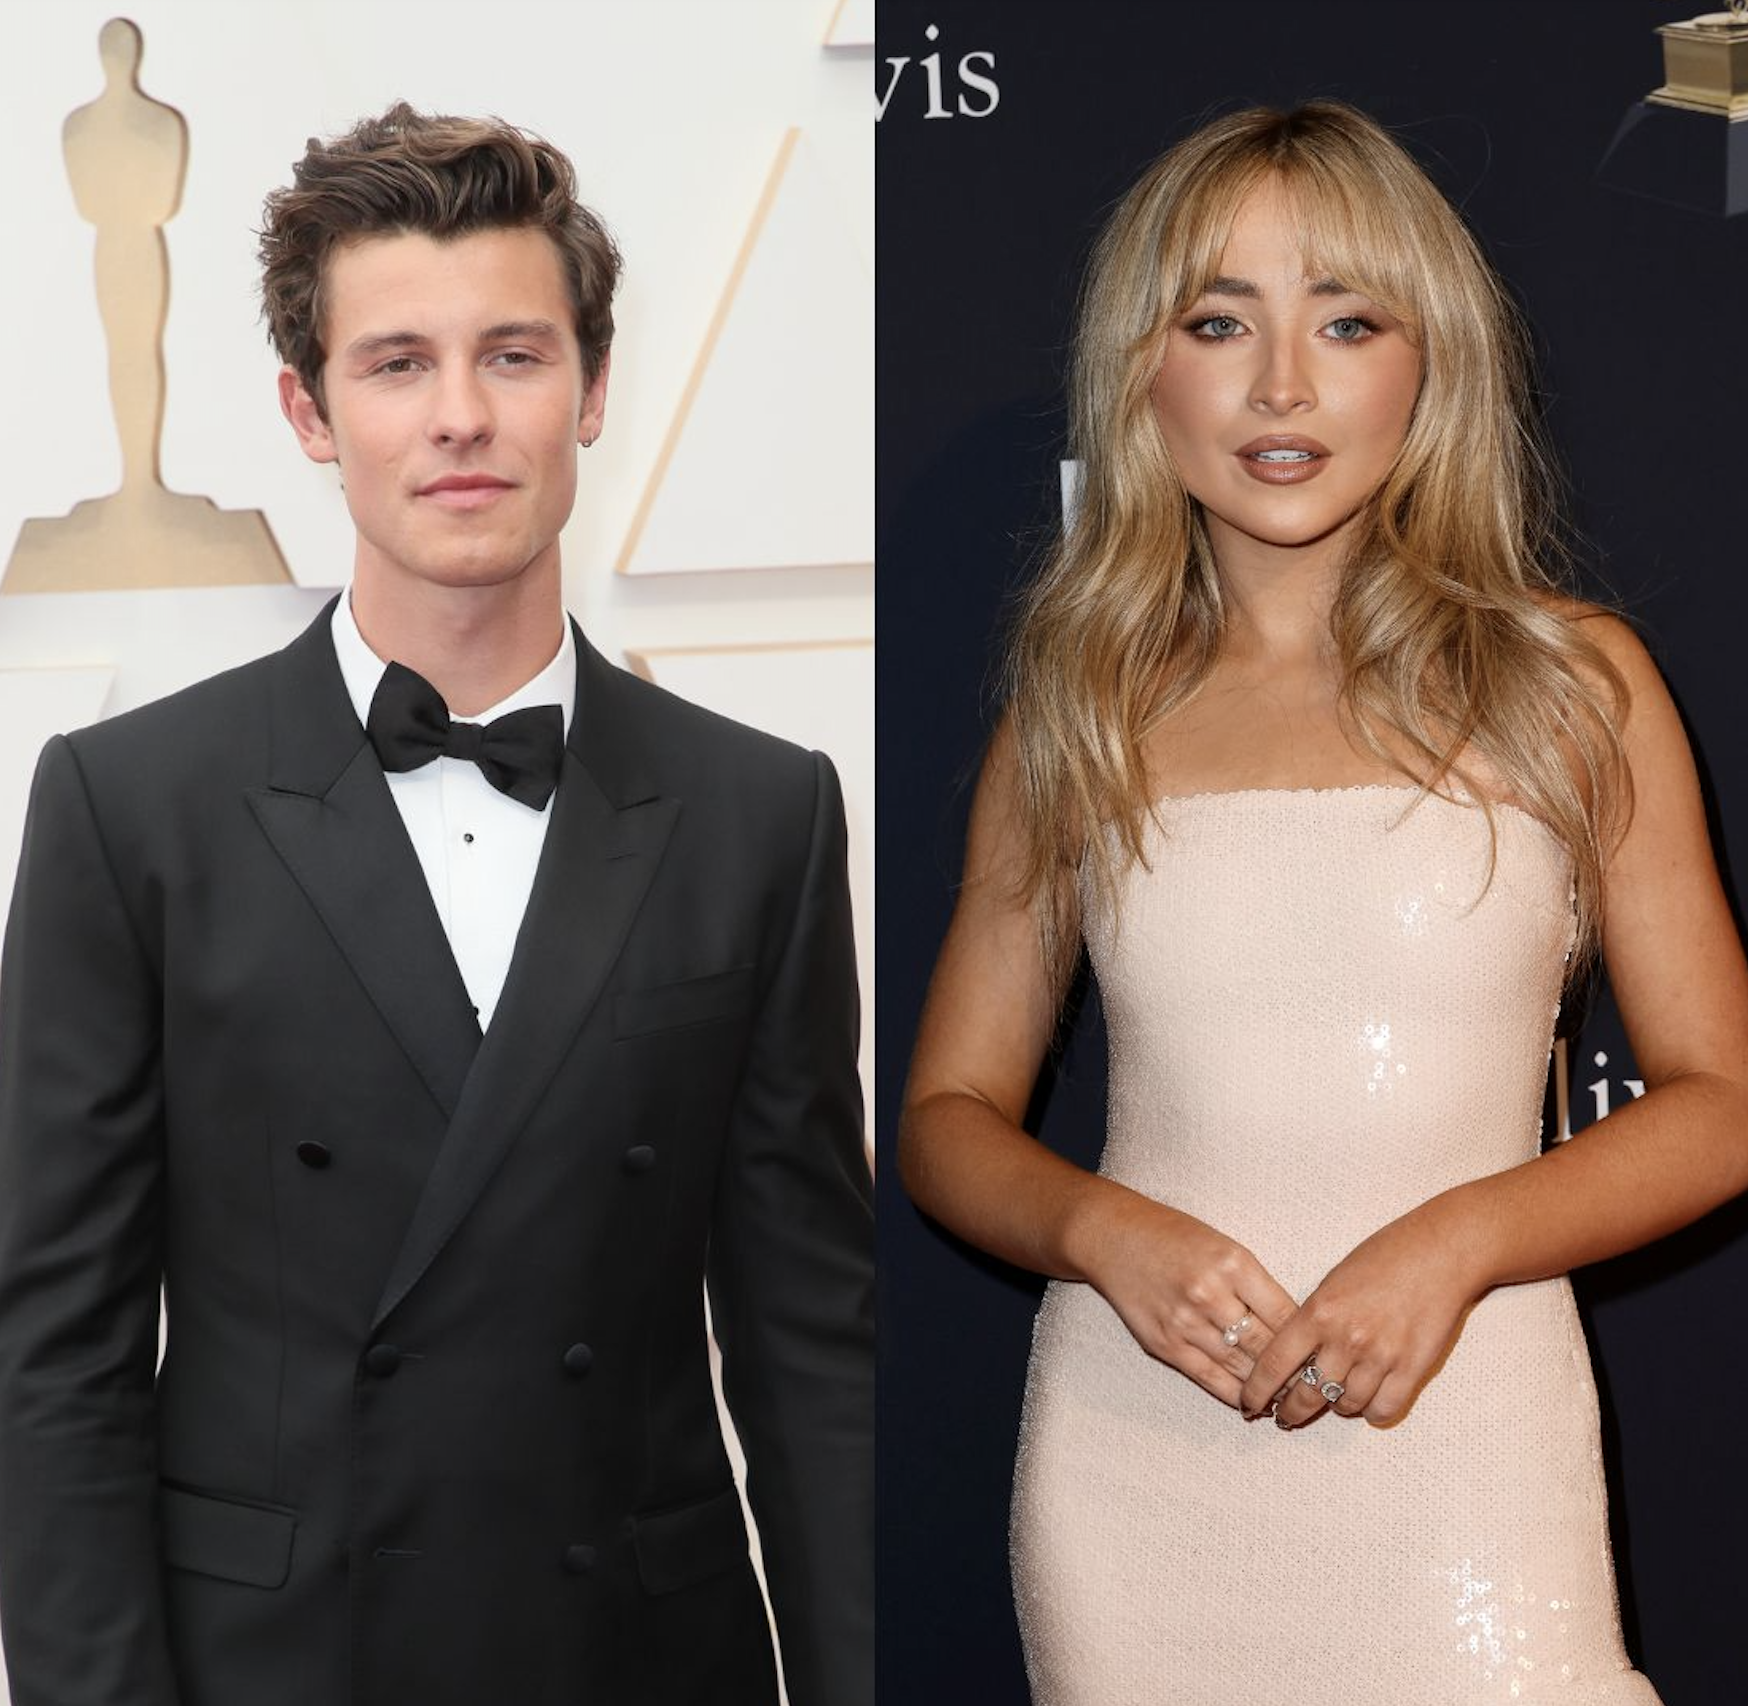 Shawn Mendes and Sabrina Carpenter Rumored Romance: What We Know